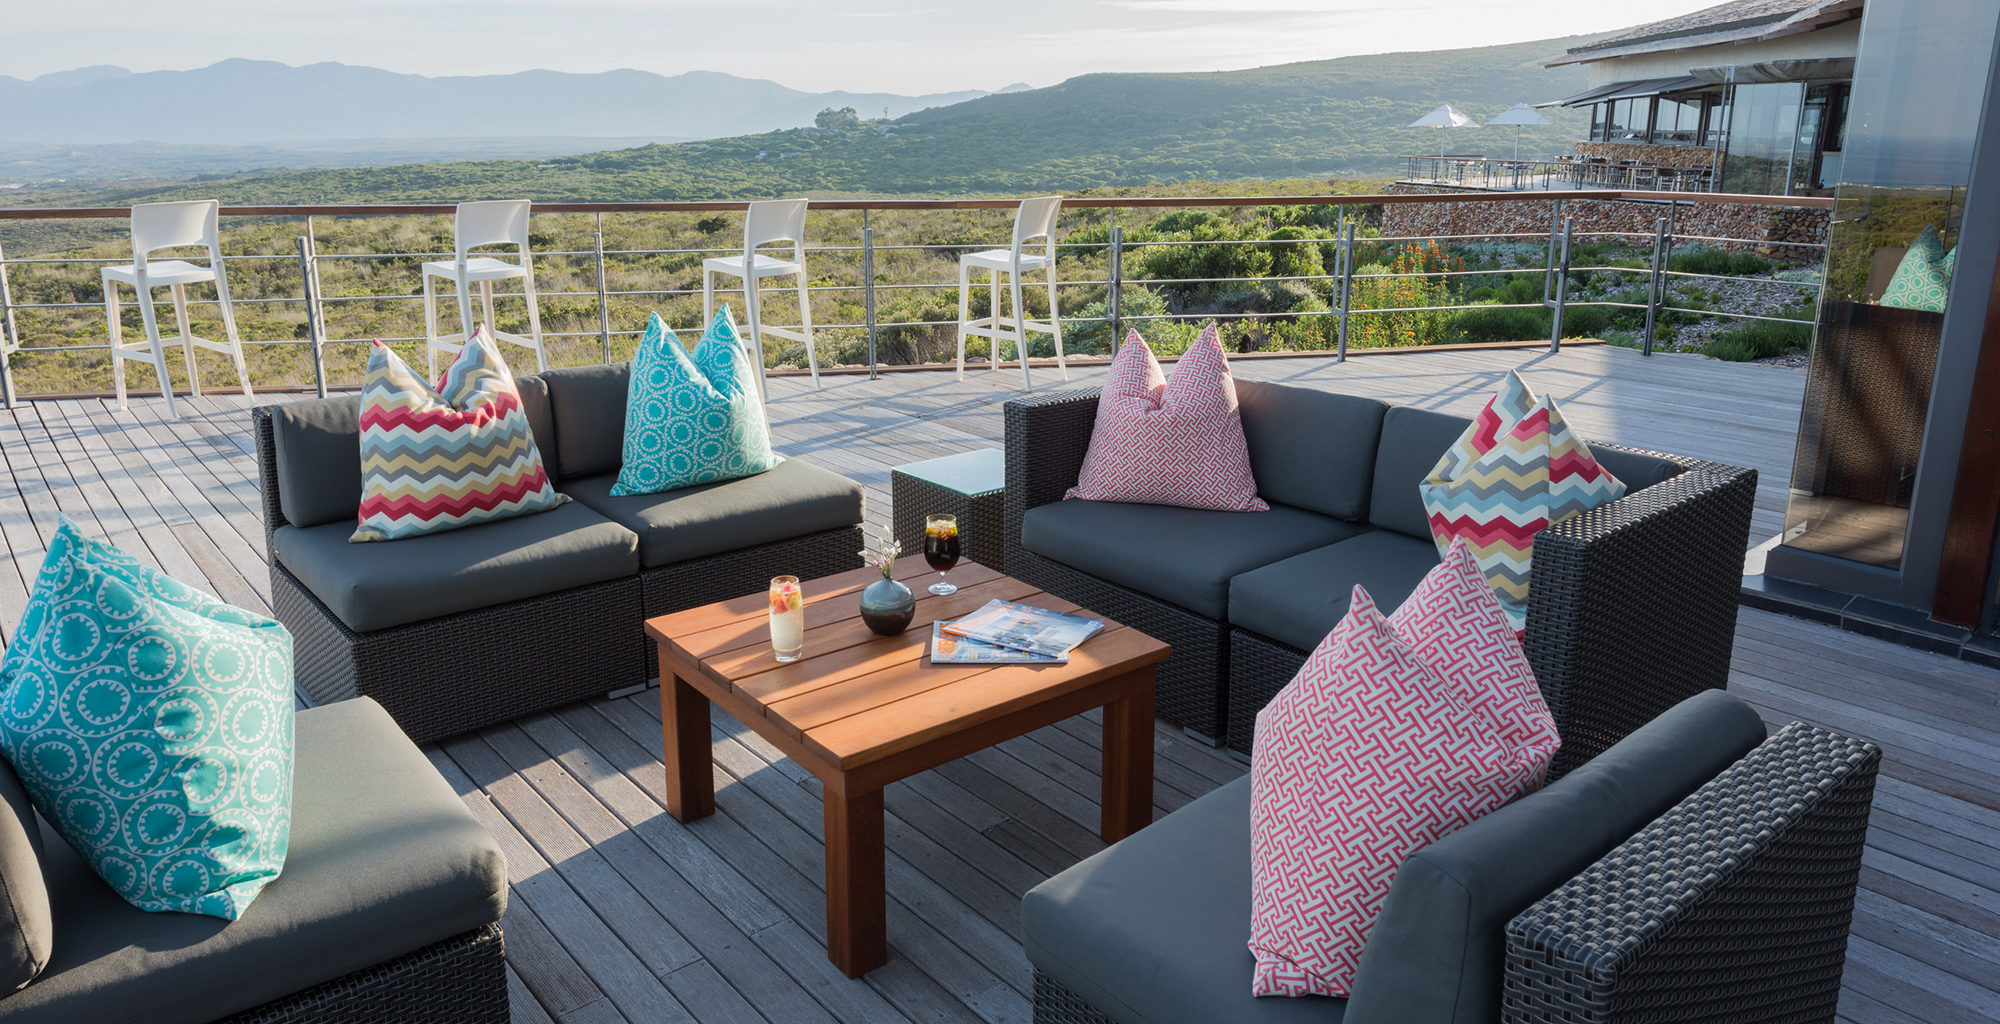 South-Africa-Grootbos-Forest-Lodge-Deck-Area